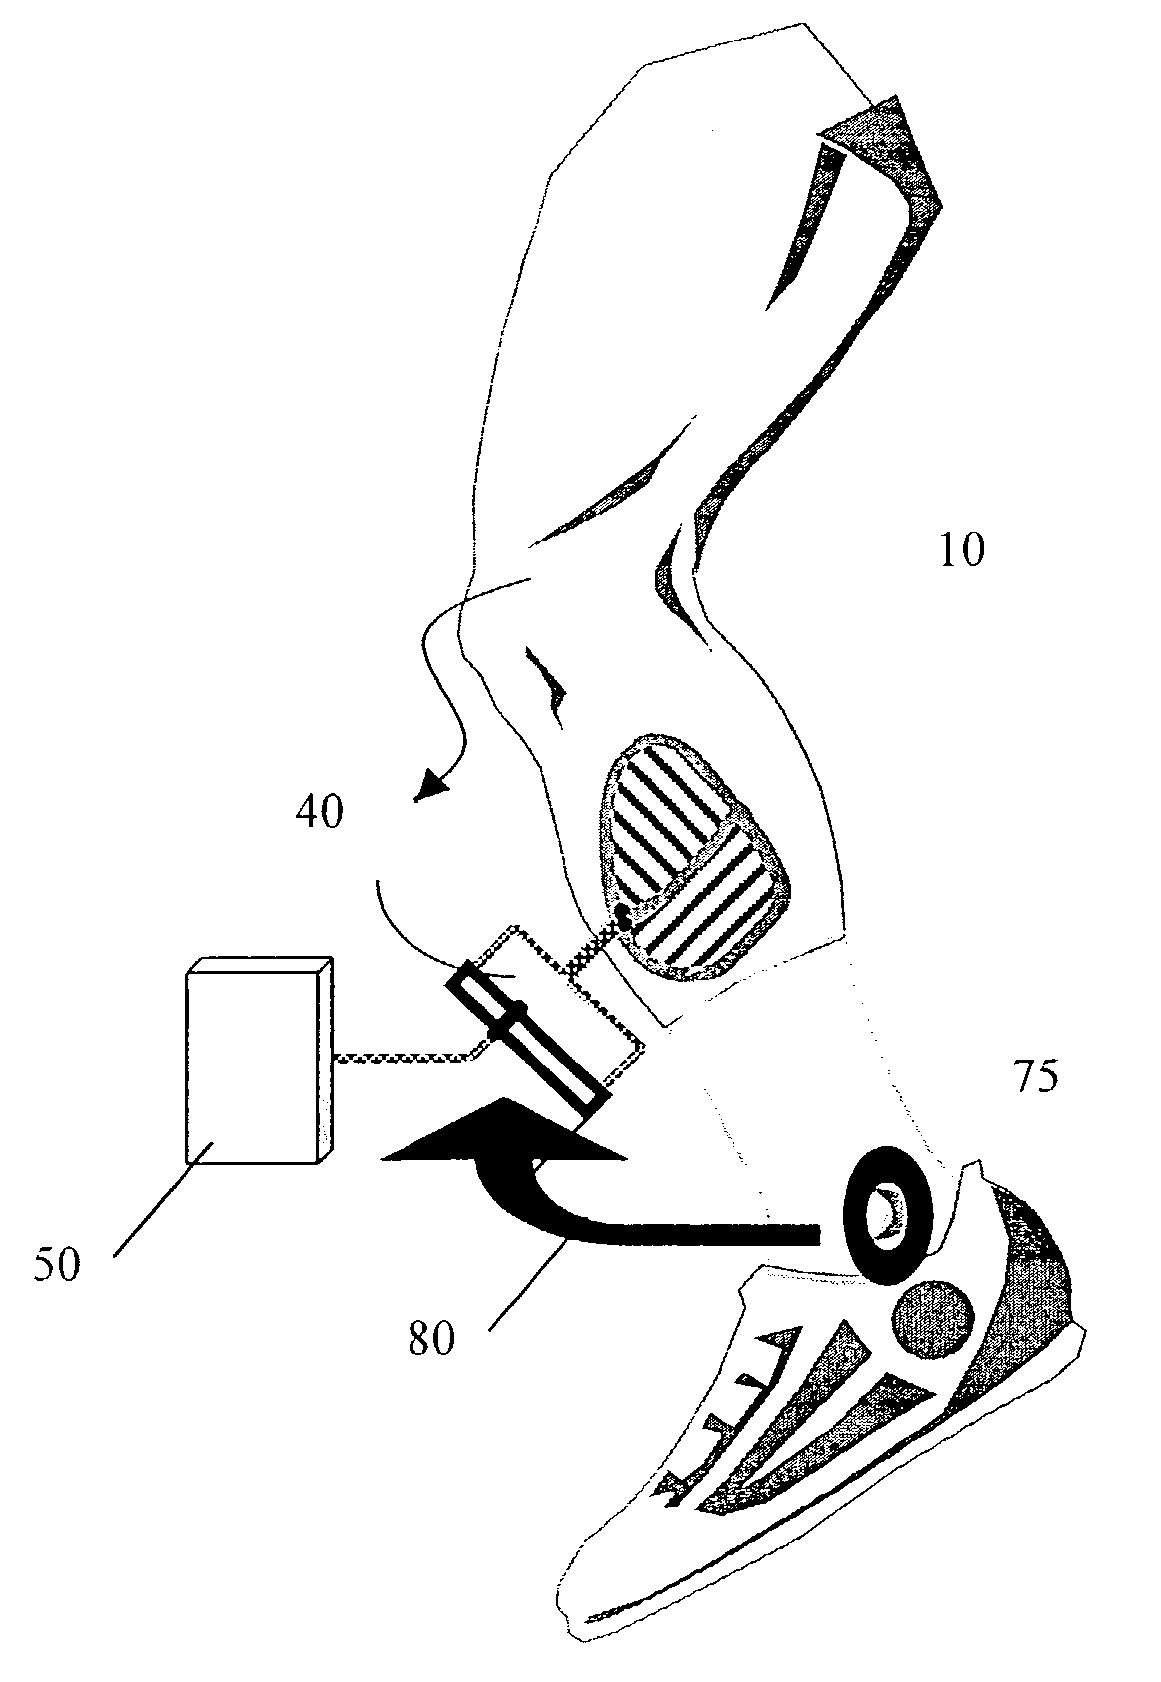 Scanning electrode system for a neuroprosthesis